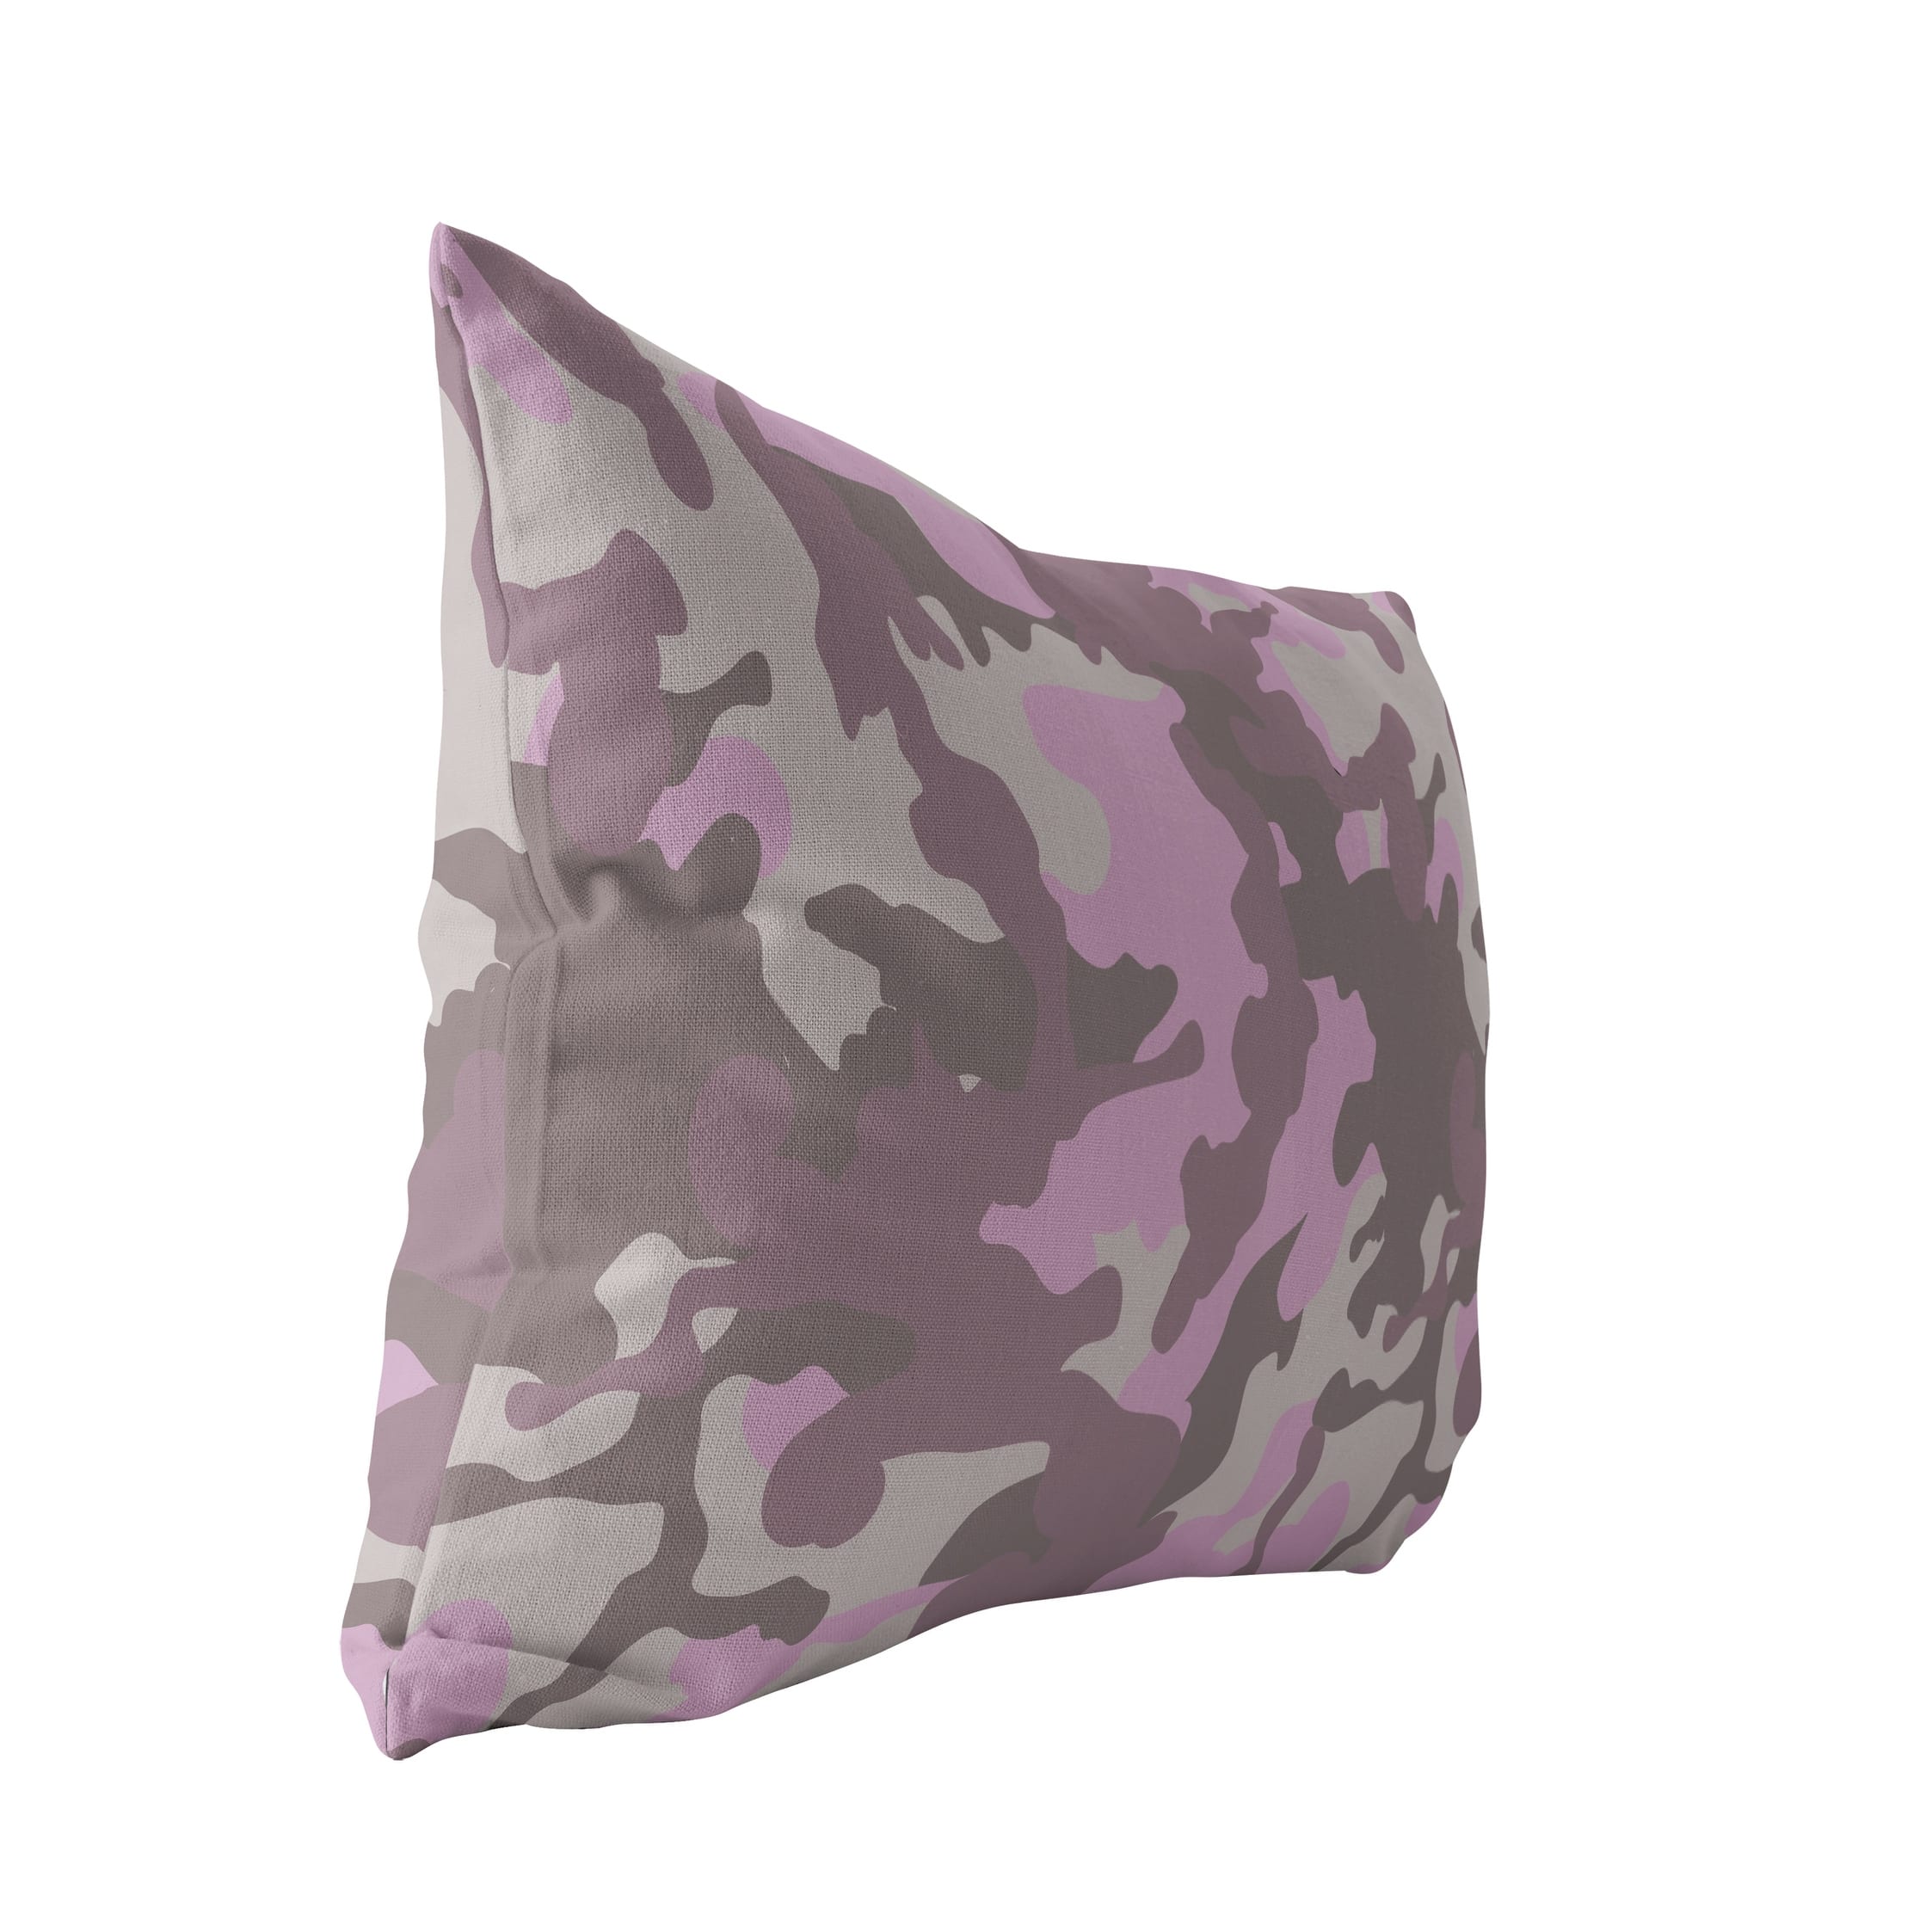 CAMO FLOW PINK AND PURPLE FADED Indoor|Outdoor Lumbar Pillow By Kavka ...